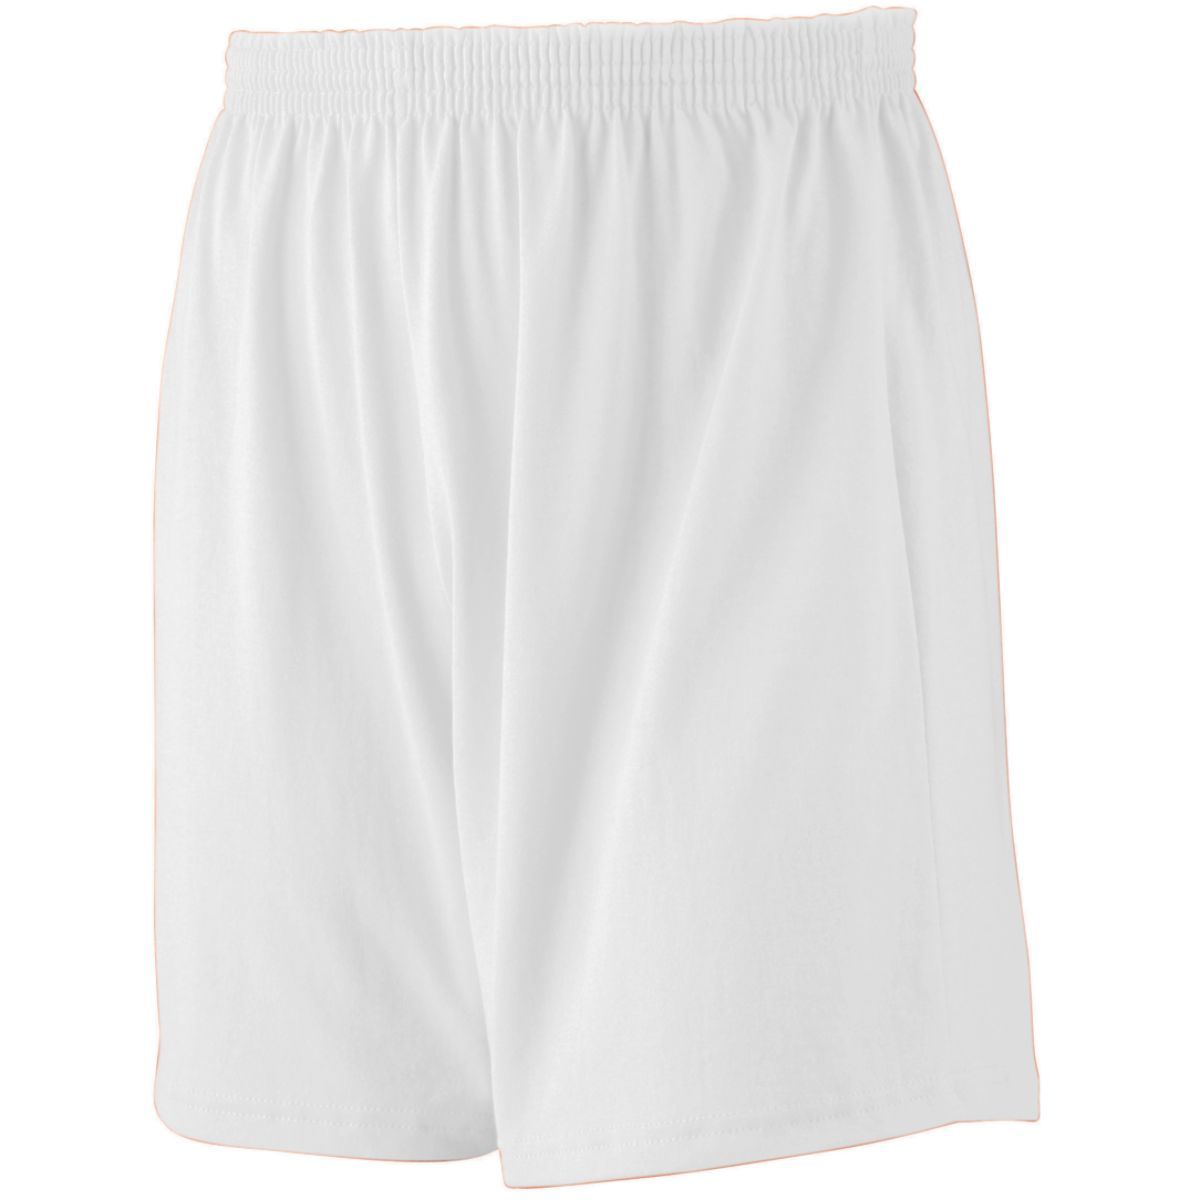 Augusta Sportswear Youth Jersey Knit Shorts in White  -Part of the Youth, Youth-Shorts, Augusta-Products product lines at KanaleyCreations.com